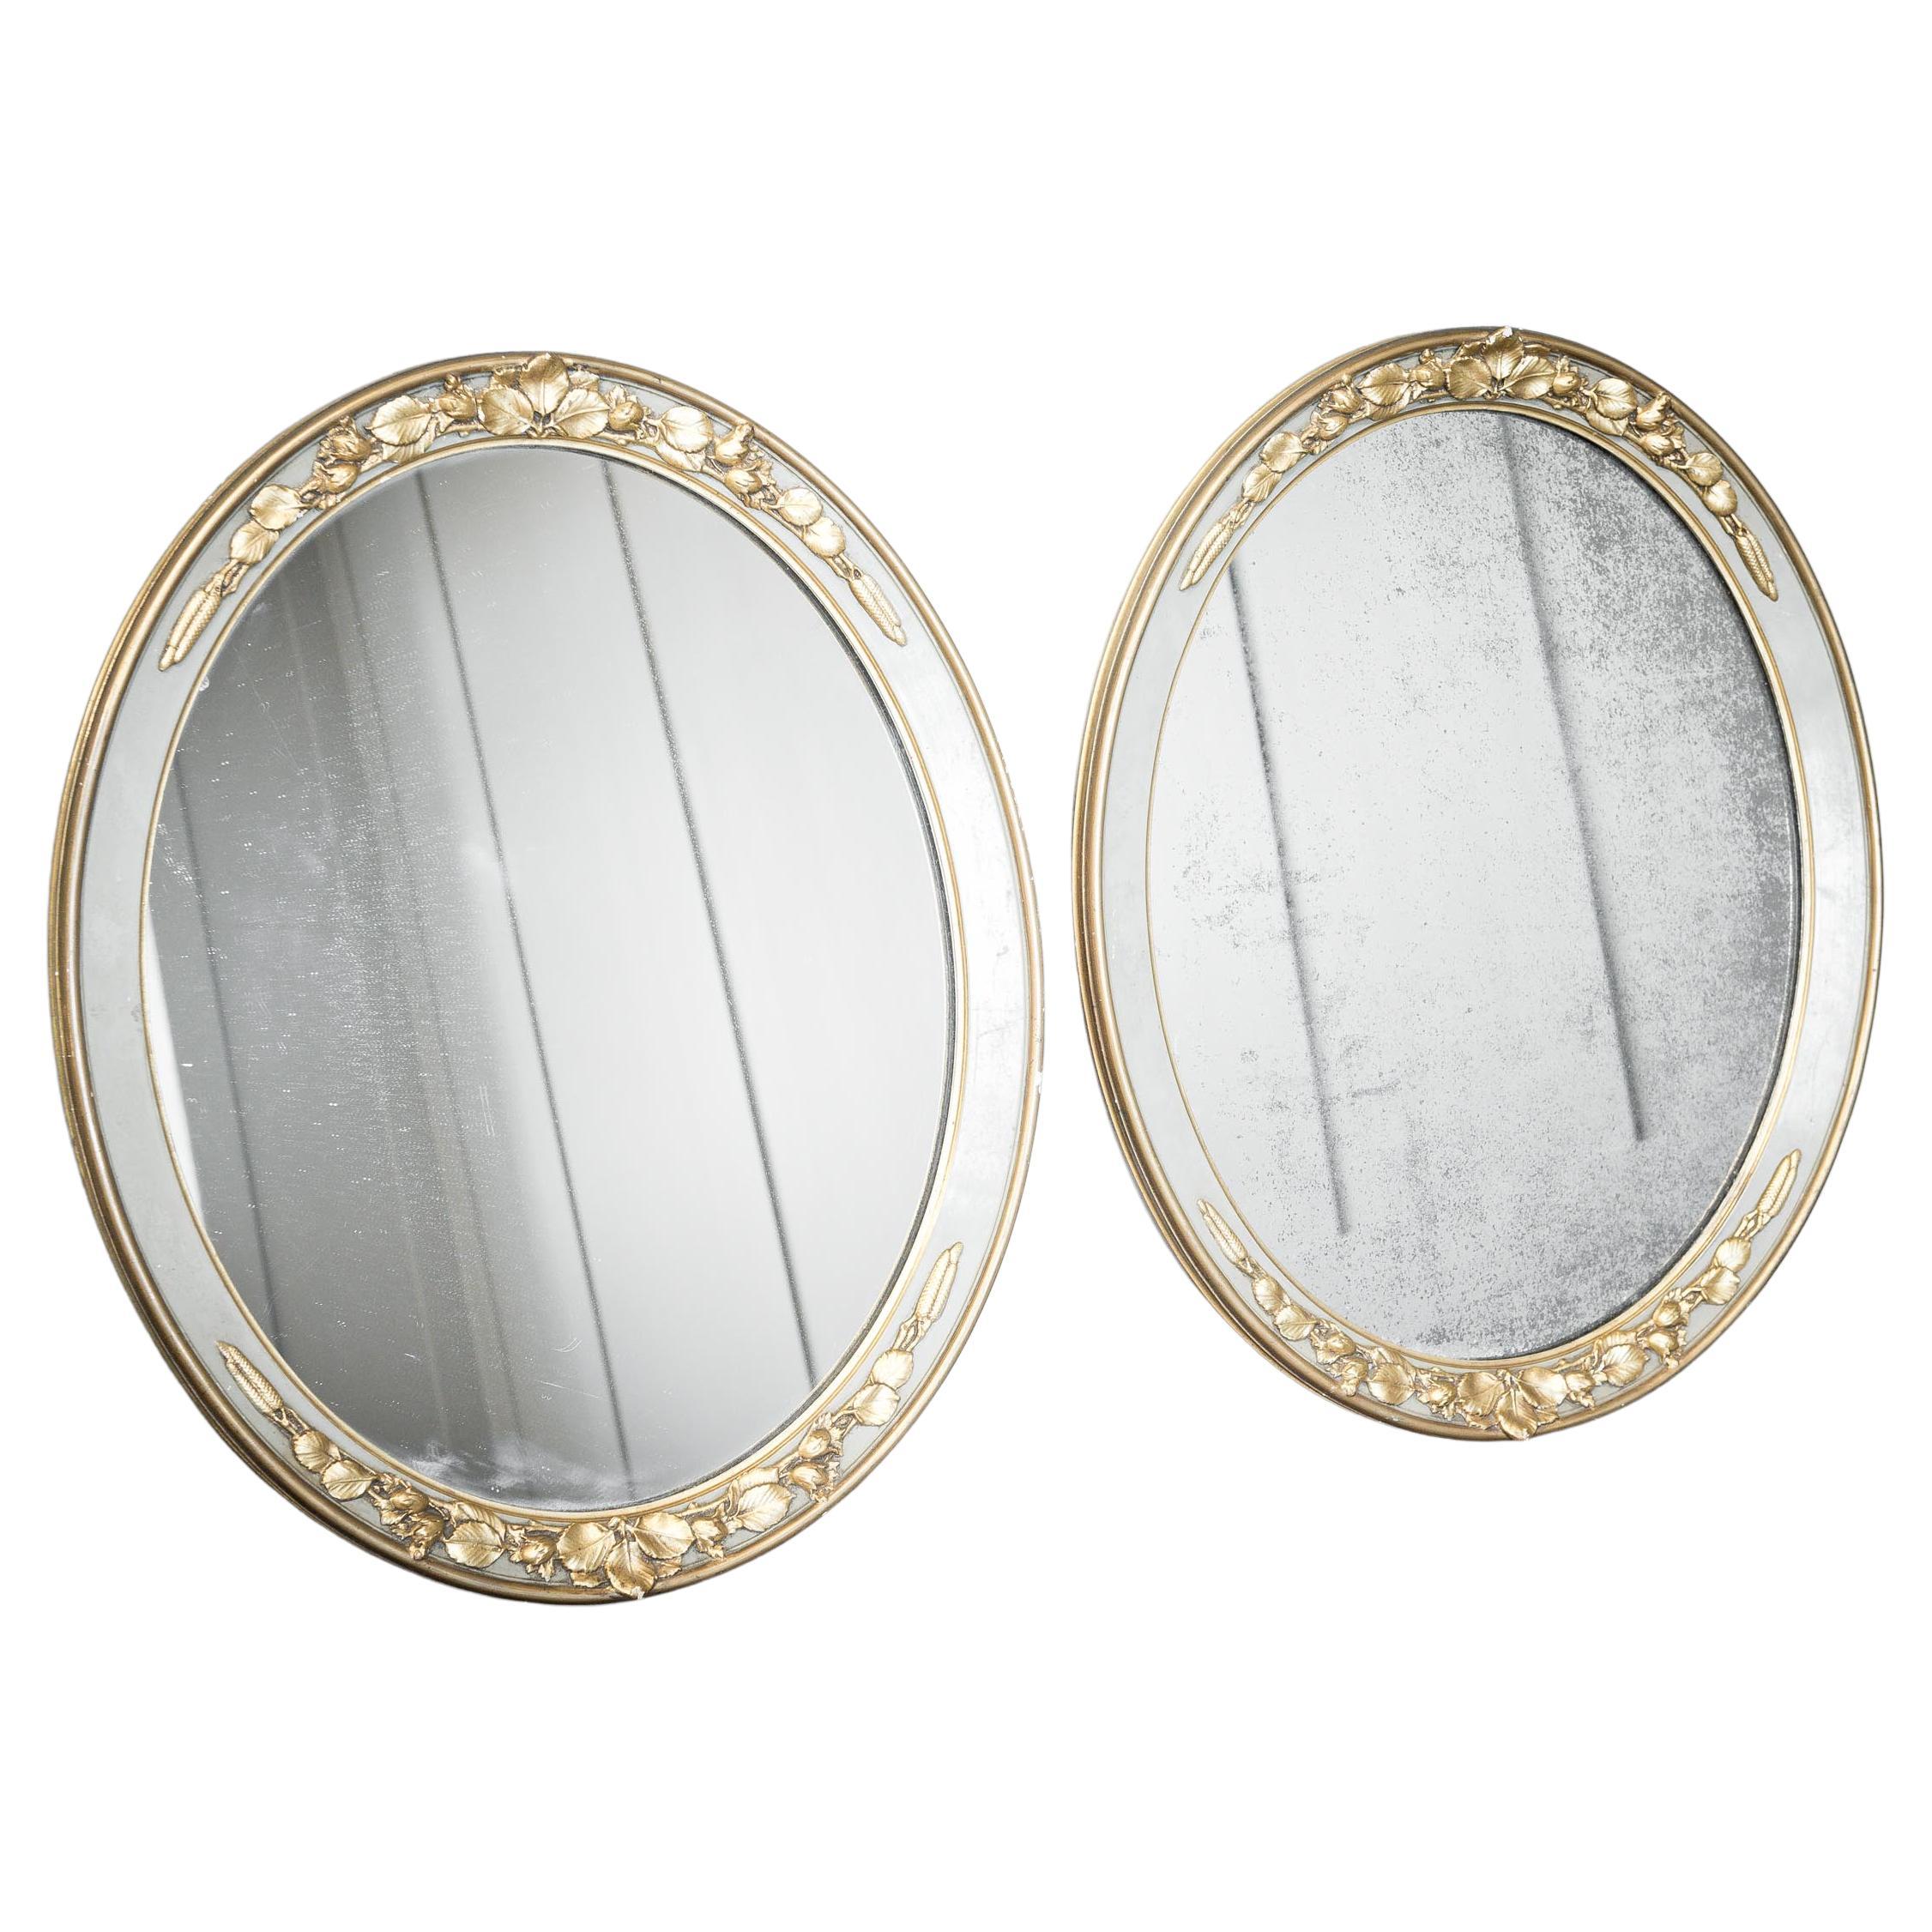 2 x Oval Plaster Decorated Mirrors For Sale